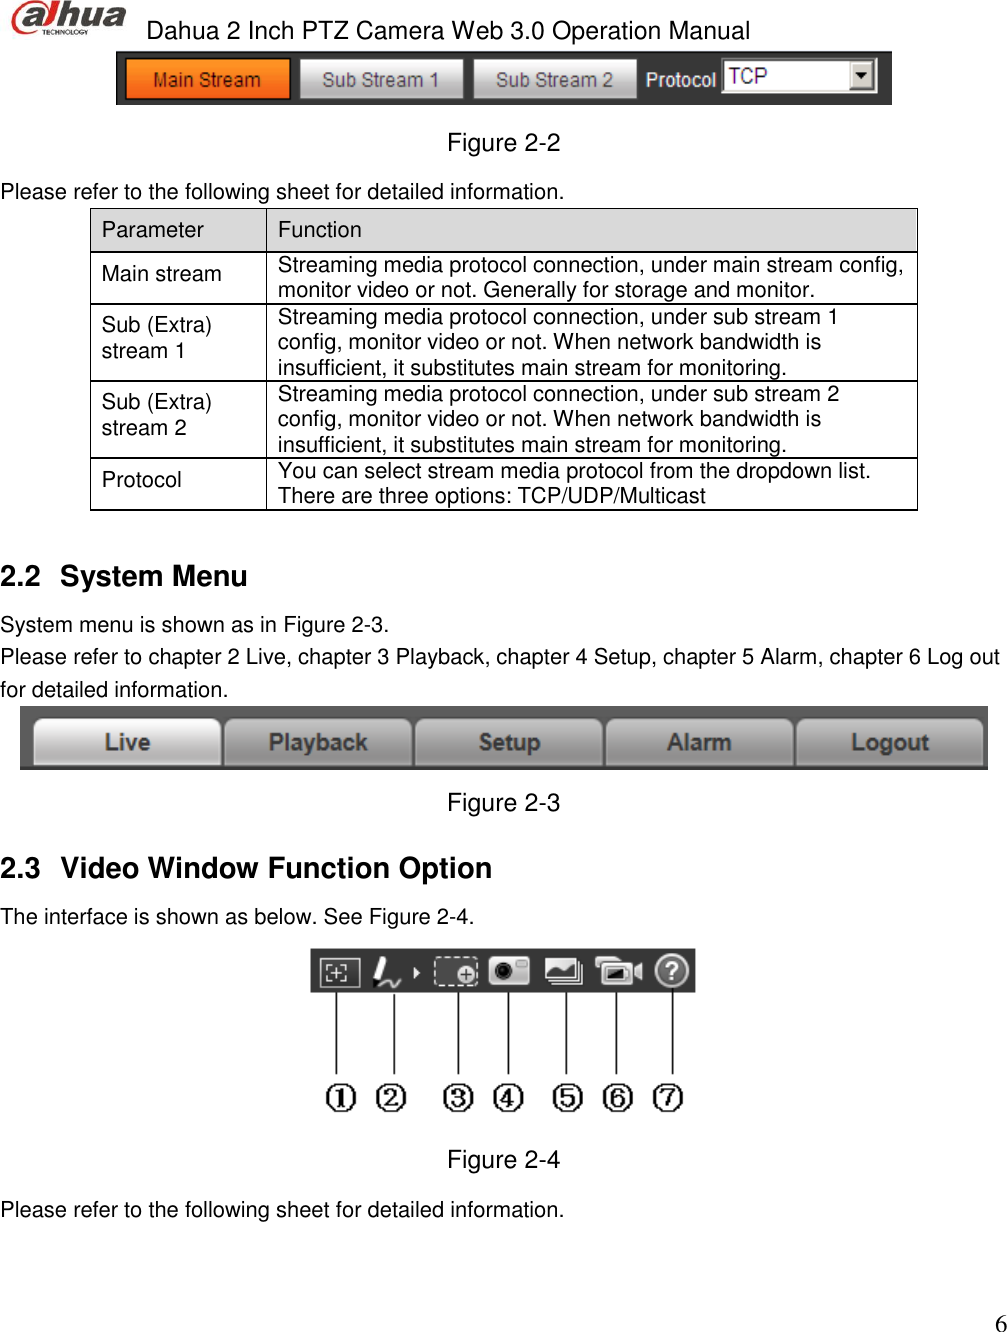  Dahua 2 Inch PTZ Camera Web 3.0 Operation Manual                                                                             6  Figure 2-2 Please refer to the following sheet for detailed information.  Parameter  Function  Main stream  Streaming media protocol connection, under main stream config, monitor video or not. Generally for storage and monitor.   Sub (Extra) stream 1 Streaming media protocol connection, under sub stream 1 config, monitor video or not. When network bandwidth is insufficient, it substitutes main stream for monitoring.  Sub (Extra) stream 2 Streaming media protocol connection, under sub stream 2 config, monitor video or not. When network bandwidth is insufficient, it substitutes main stream for monitoring. Protocol  You can select stream media protocol from the dropdown list.  There are three options: TCP/UDP/Multicast  2.2  System Menu  System menu is shown as in Figure 2-3. Please refer to chapter 2 Live, chapter 3 Playback, chapter 4 Setup, chapter 5 Alarm, chapter 6 Log out  for detailed information.    Figure 2-3 2.3  Video Window Function Option  The interface is shown as below. See Figure 2-4.  Figure 2-4 Please refer to the following sheet for detailed information.  